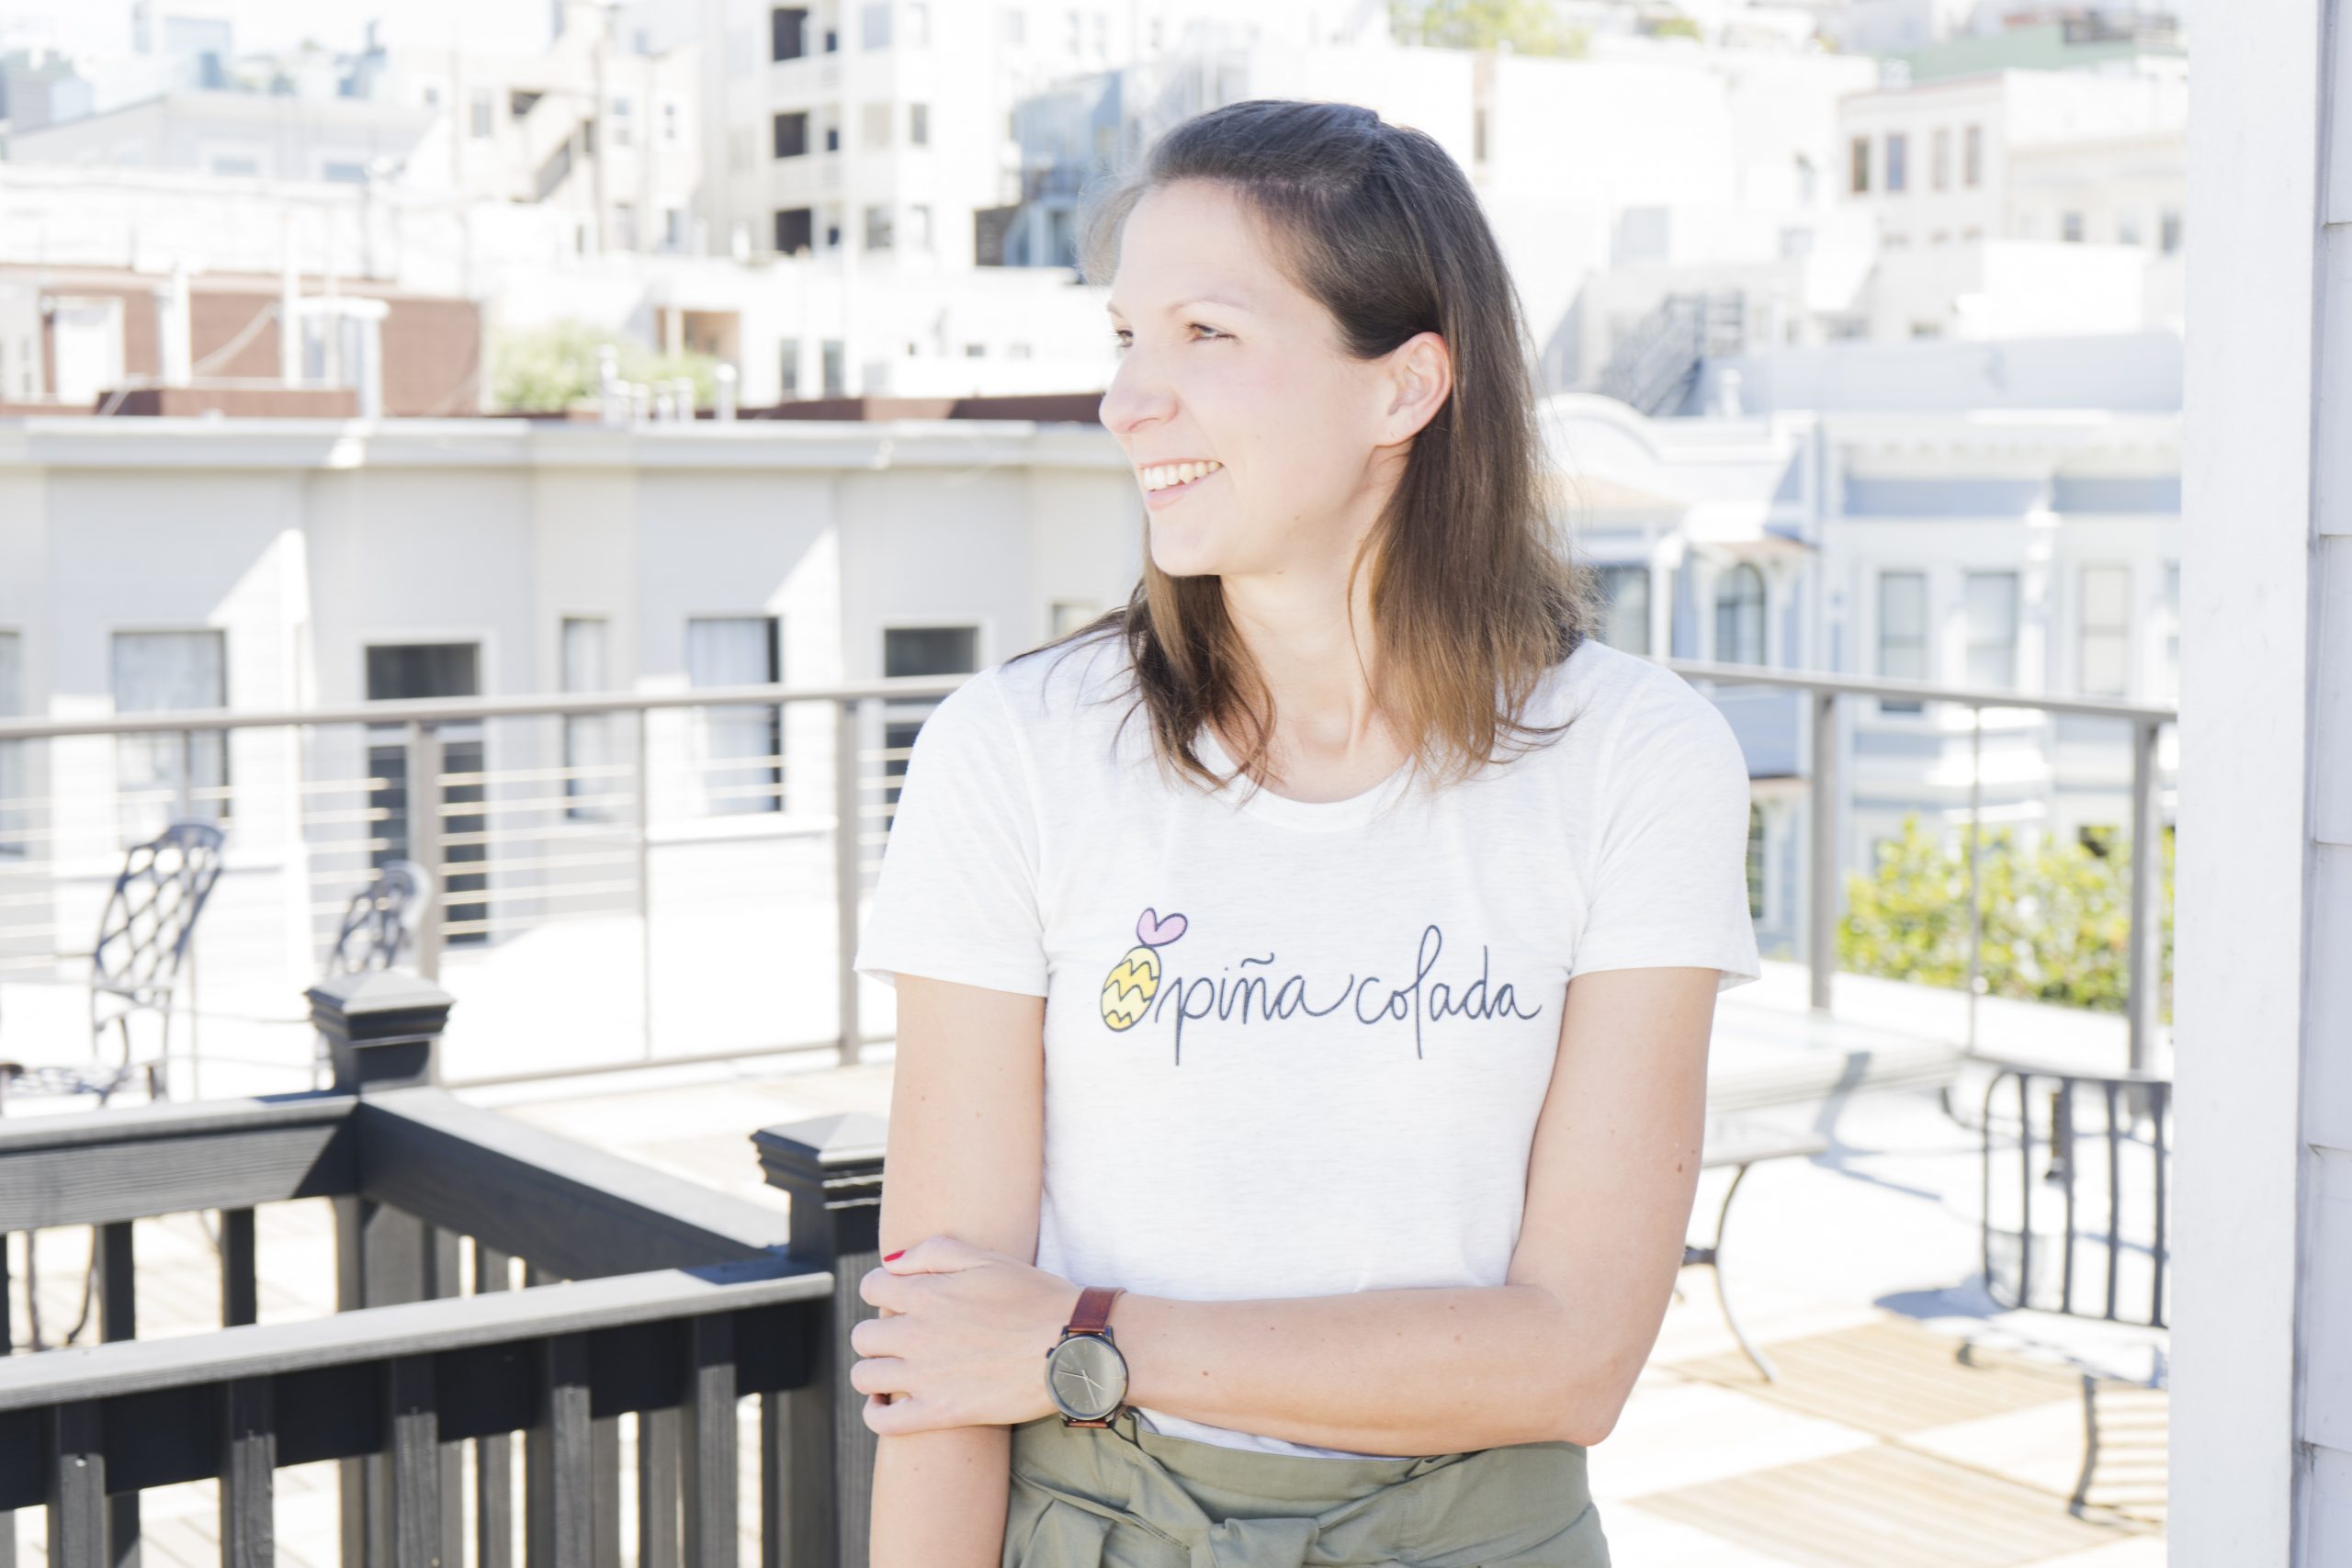 Keep Embracing the Adventure – Learnings from Building and Folding Your Own Company in Silicon Valley: An Interview with Kati Schmidt